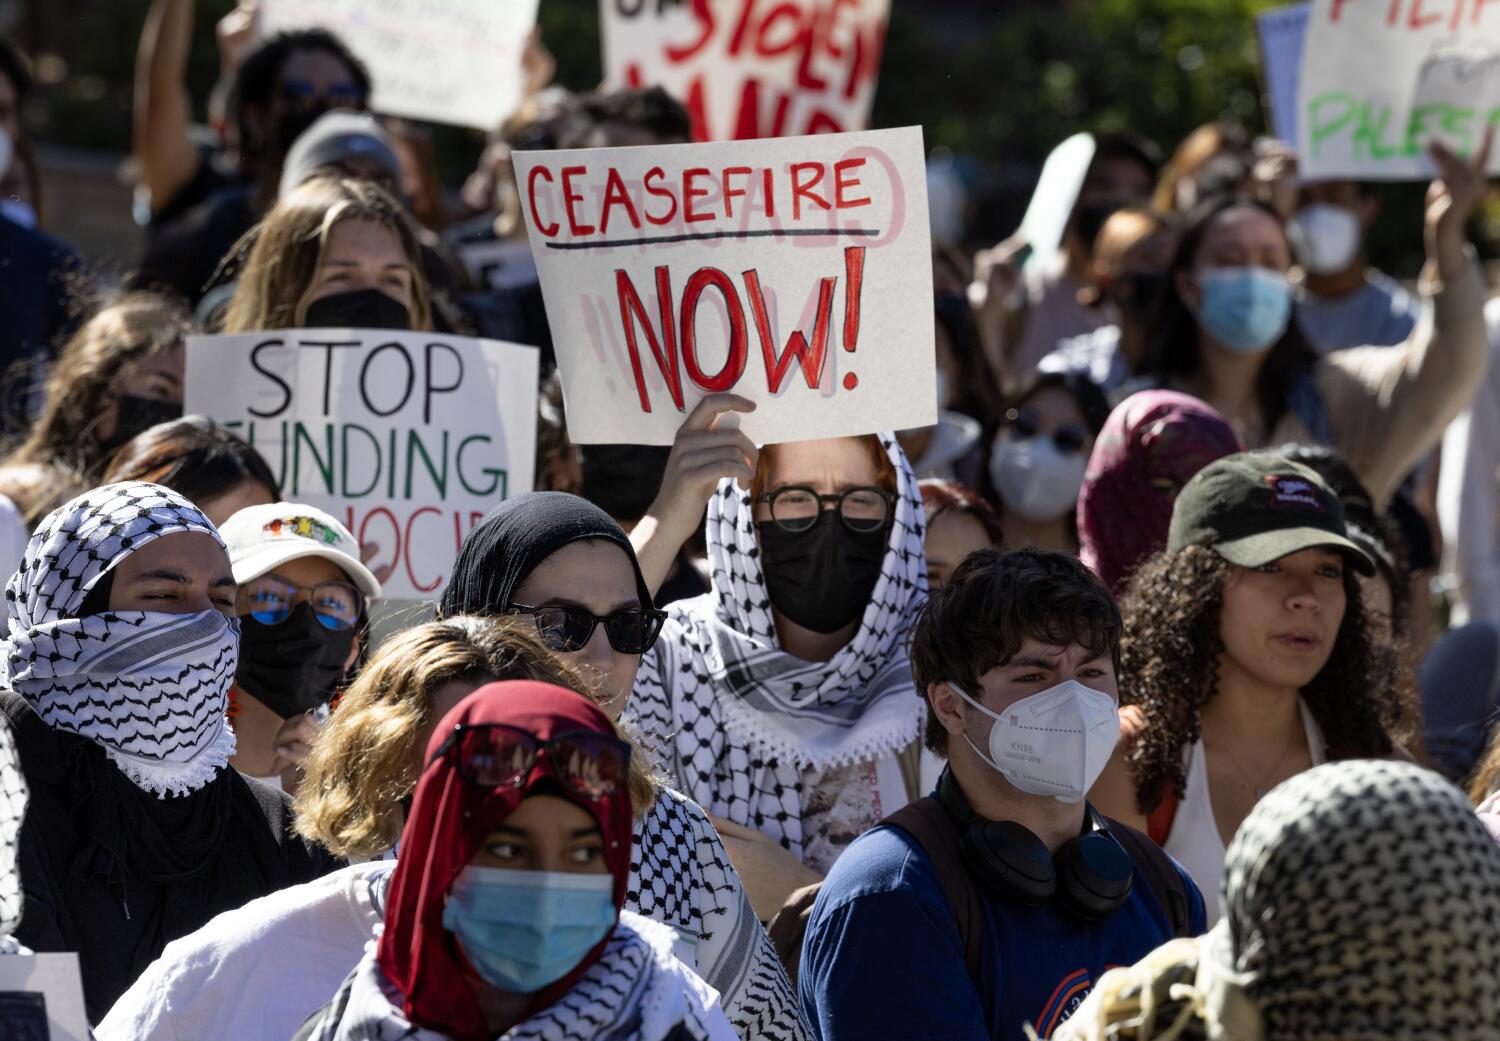 Opinion: Don't cancel U.S. college students with strong views on Israel and Gaza. Encourage complexity